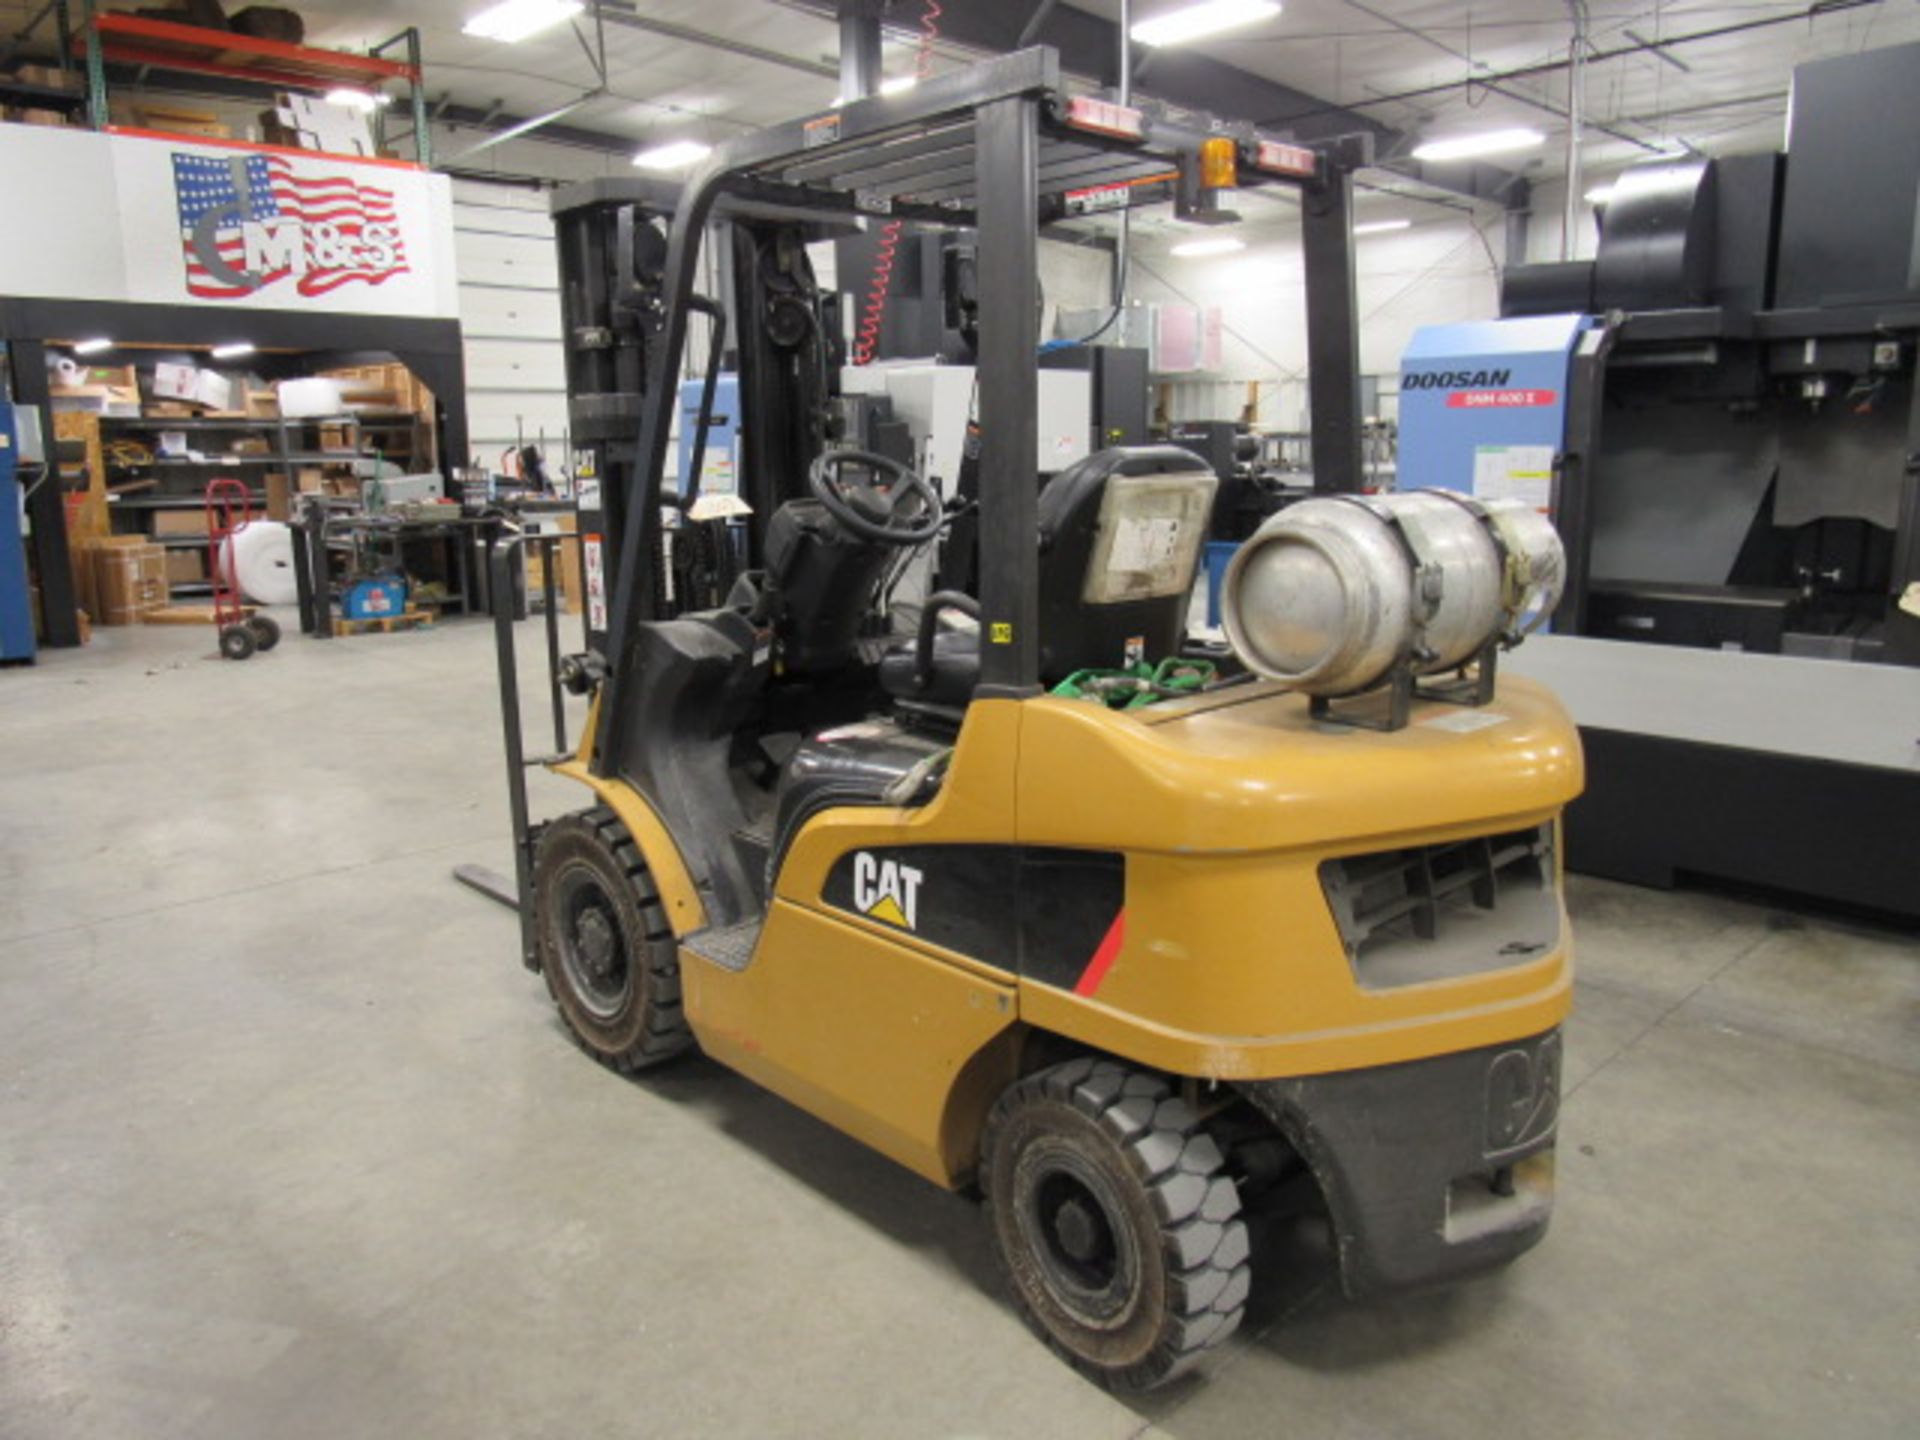 CAT Model 2P5000 5,000 lb. Capacity LP Forklift with Side Shift, Headlights, Safety Light, Outdoor - Image 5 of 8